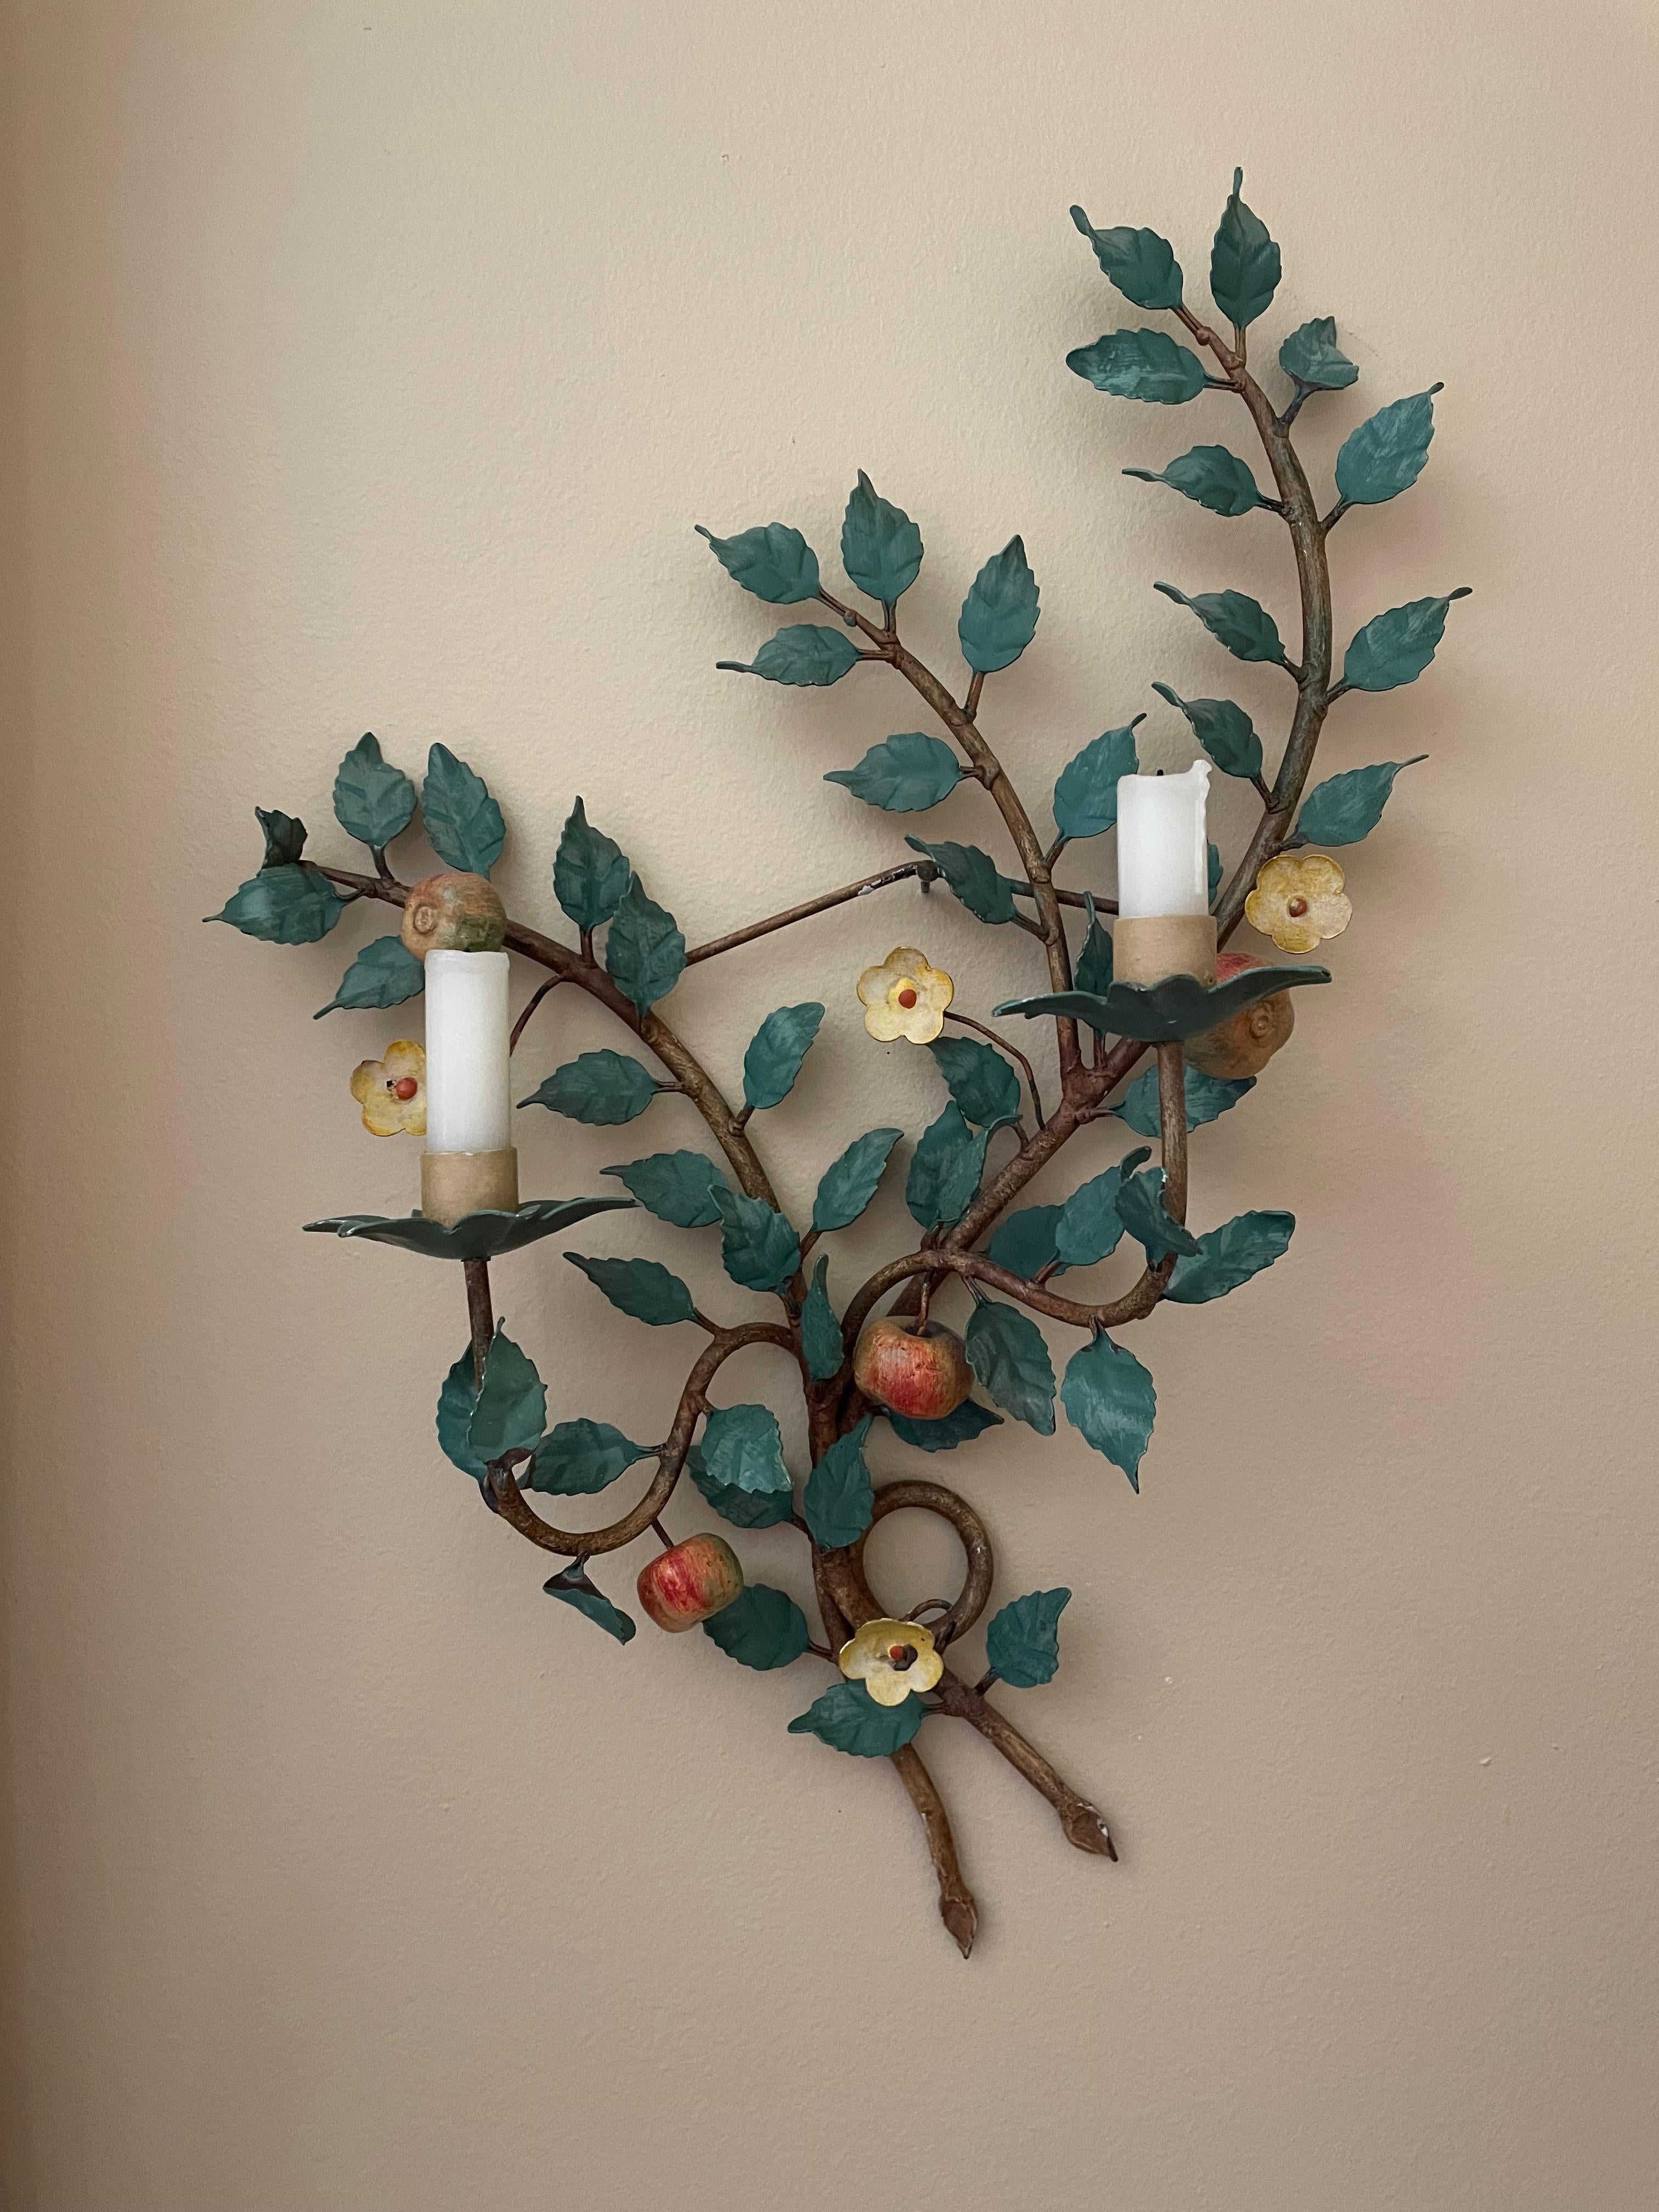 Hollywood Regency 1950s Italian Painted Metal Leaf and Branch Candle Wall Sconce For Sale